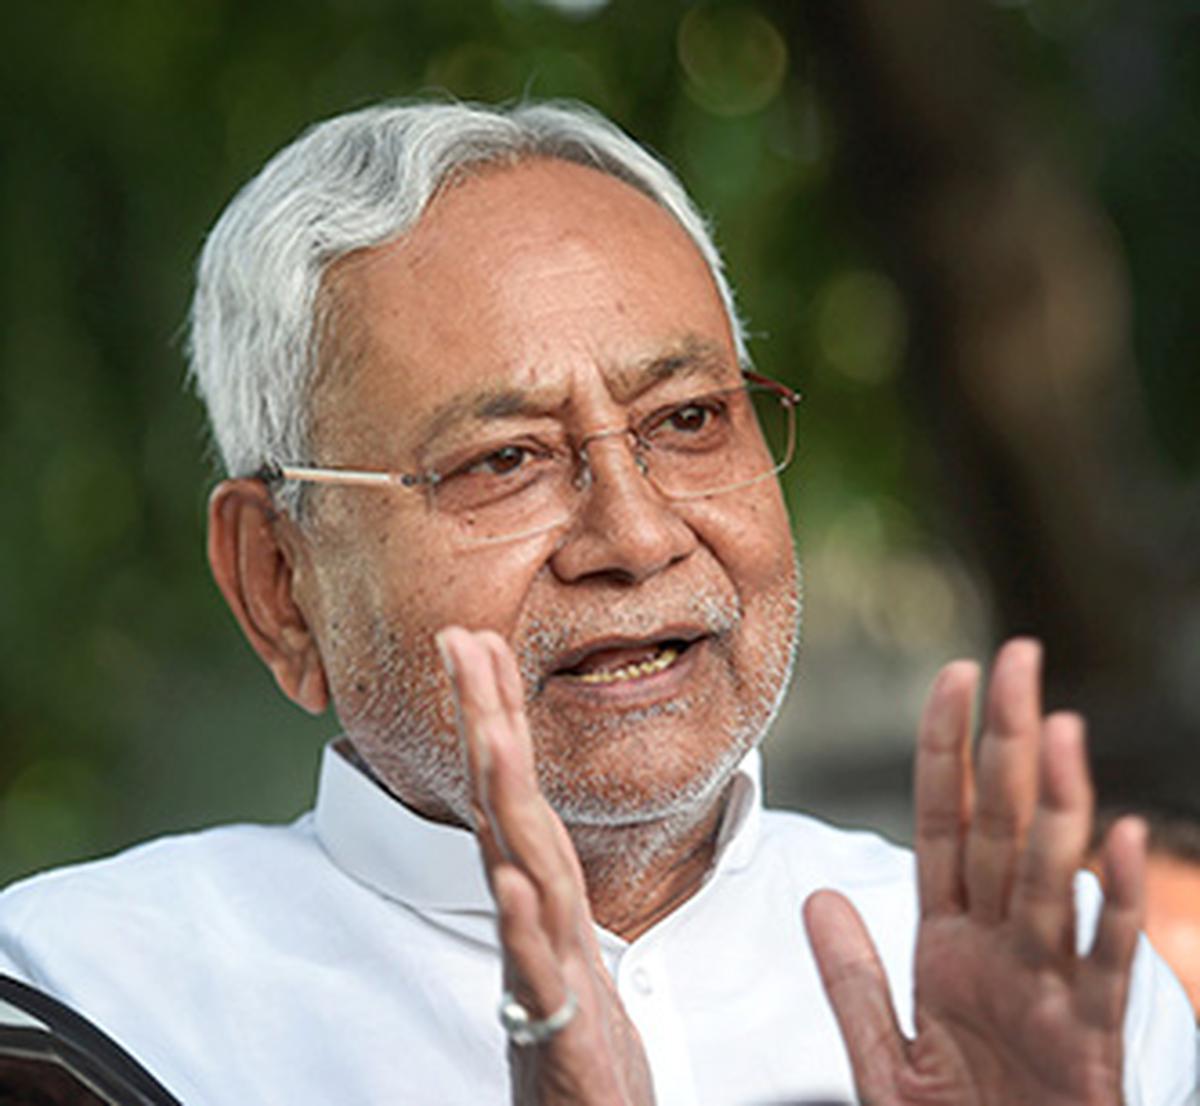 CBI charge sheet against Lalu Prasad, family | There's nothing in the case,  says Bihar CM Nitish Kumar - The Hindu